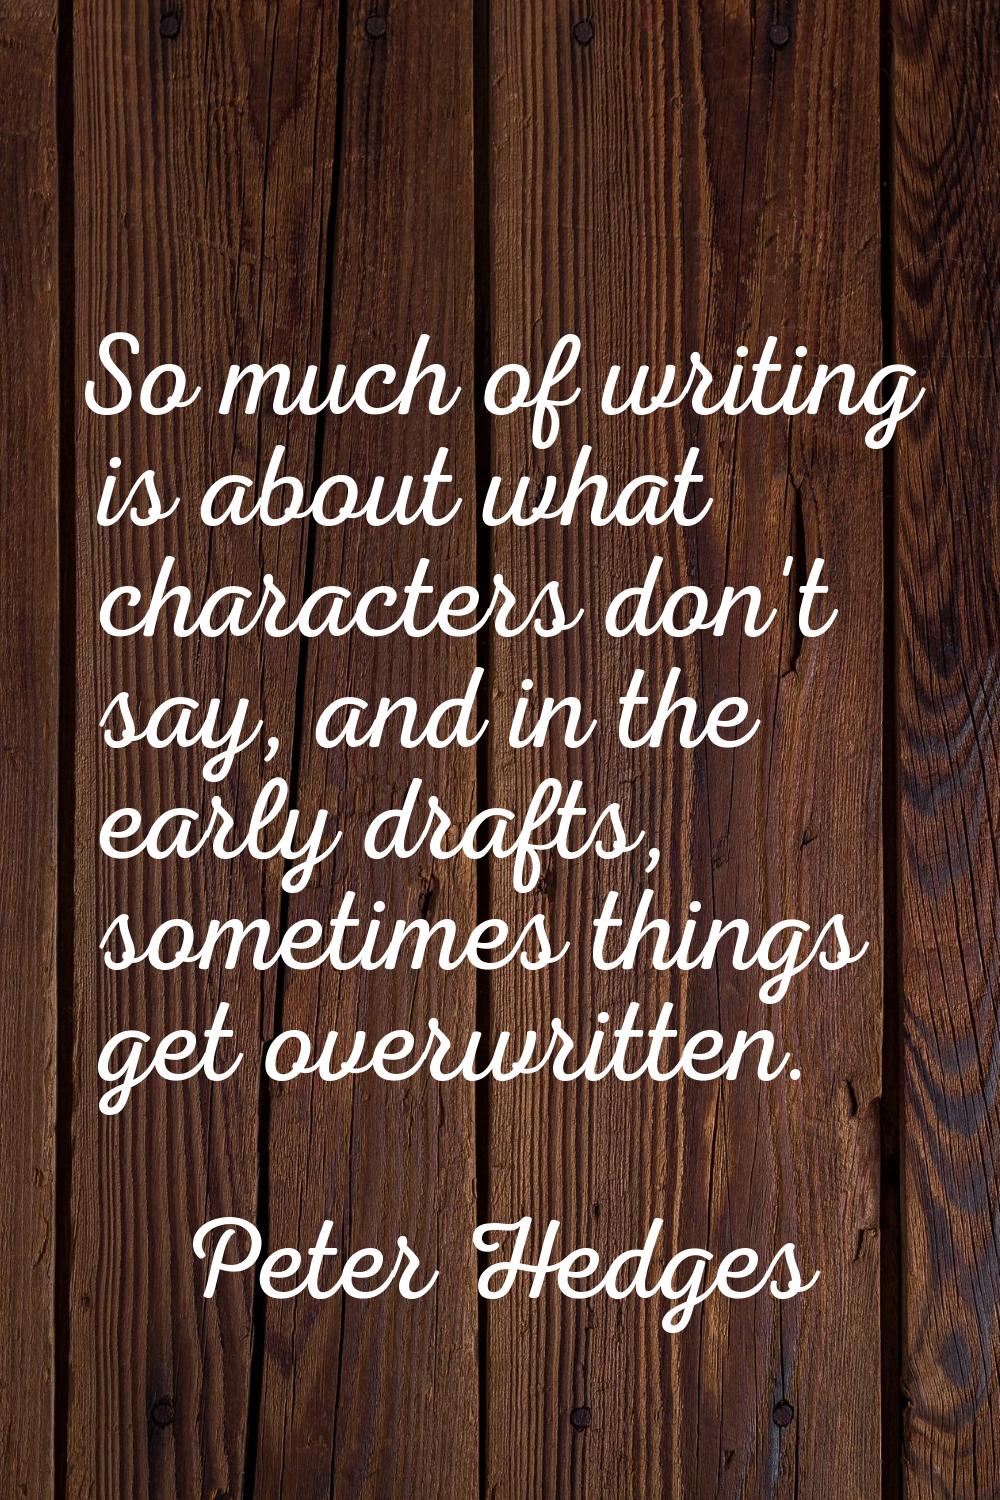 So much of writing is about what characters don't say, and in the early drafts, sometimes things ge